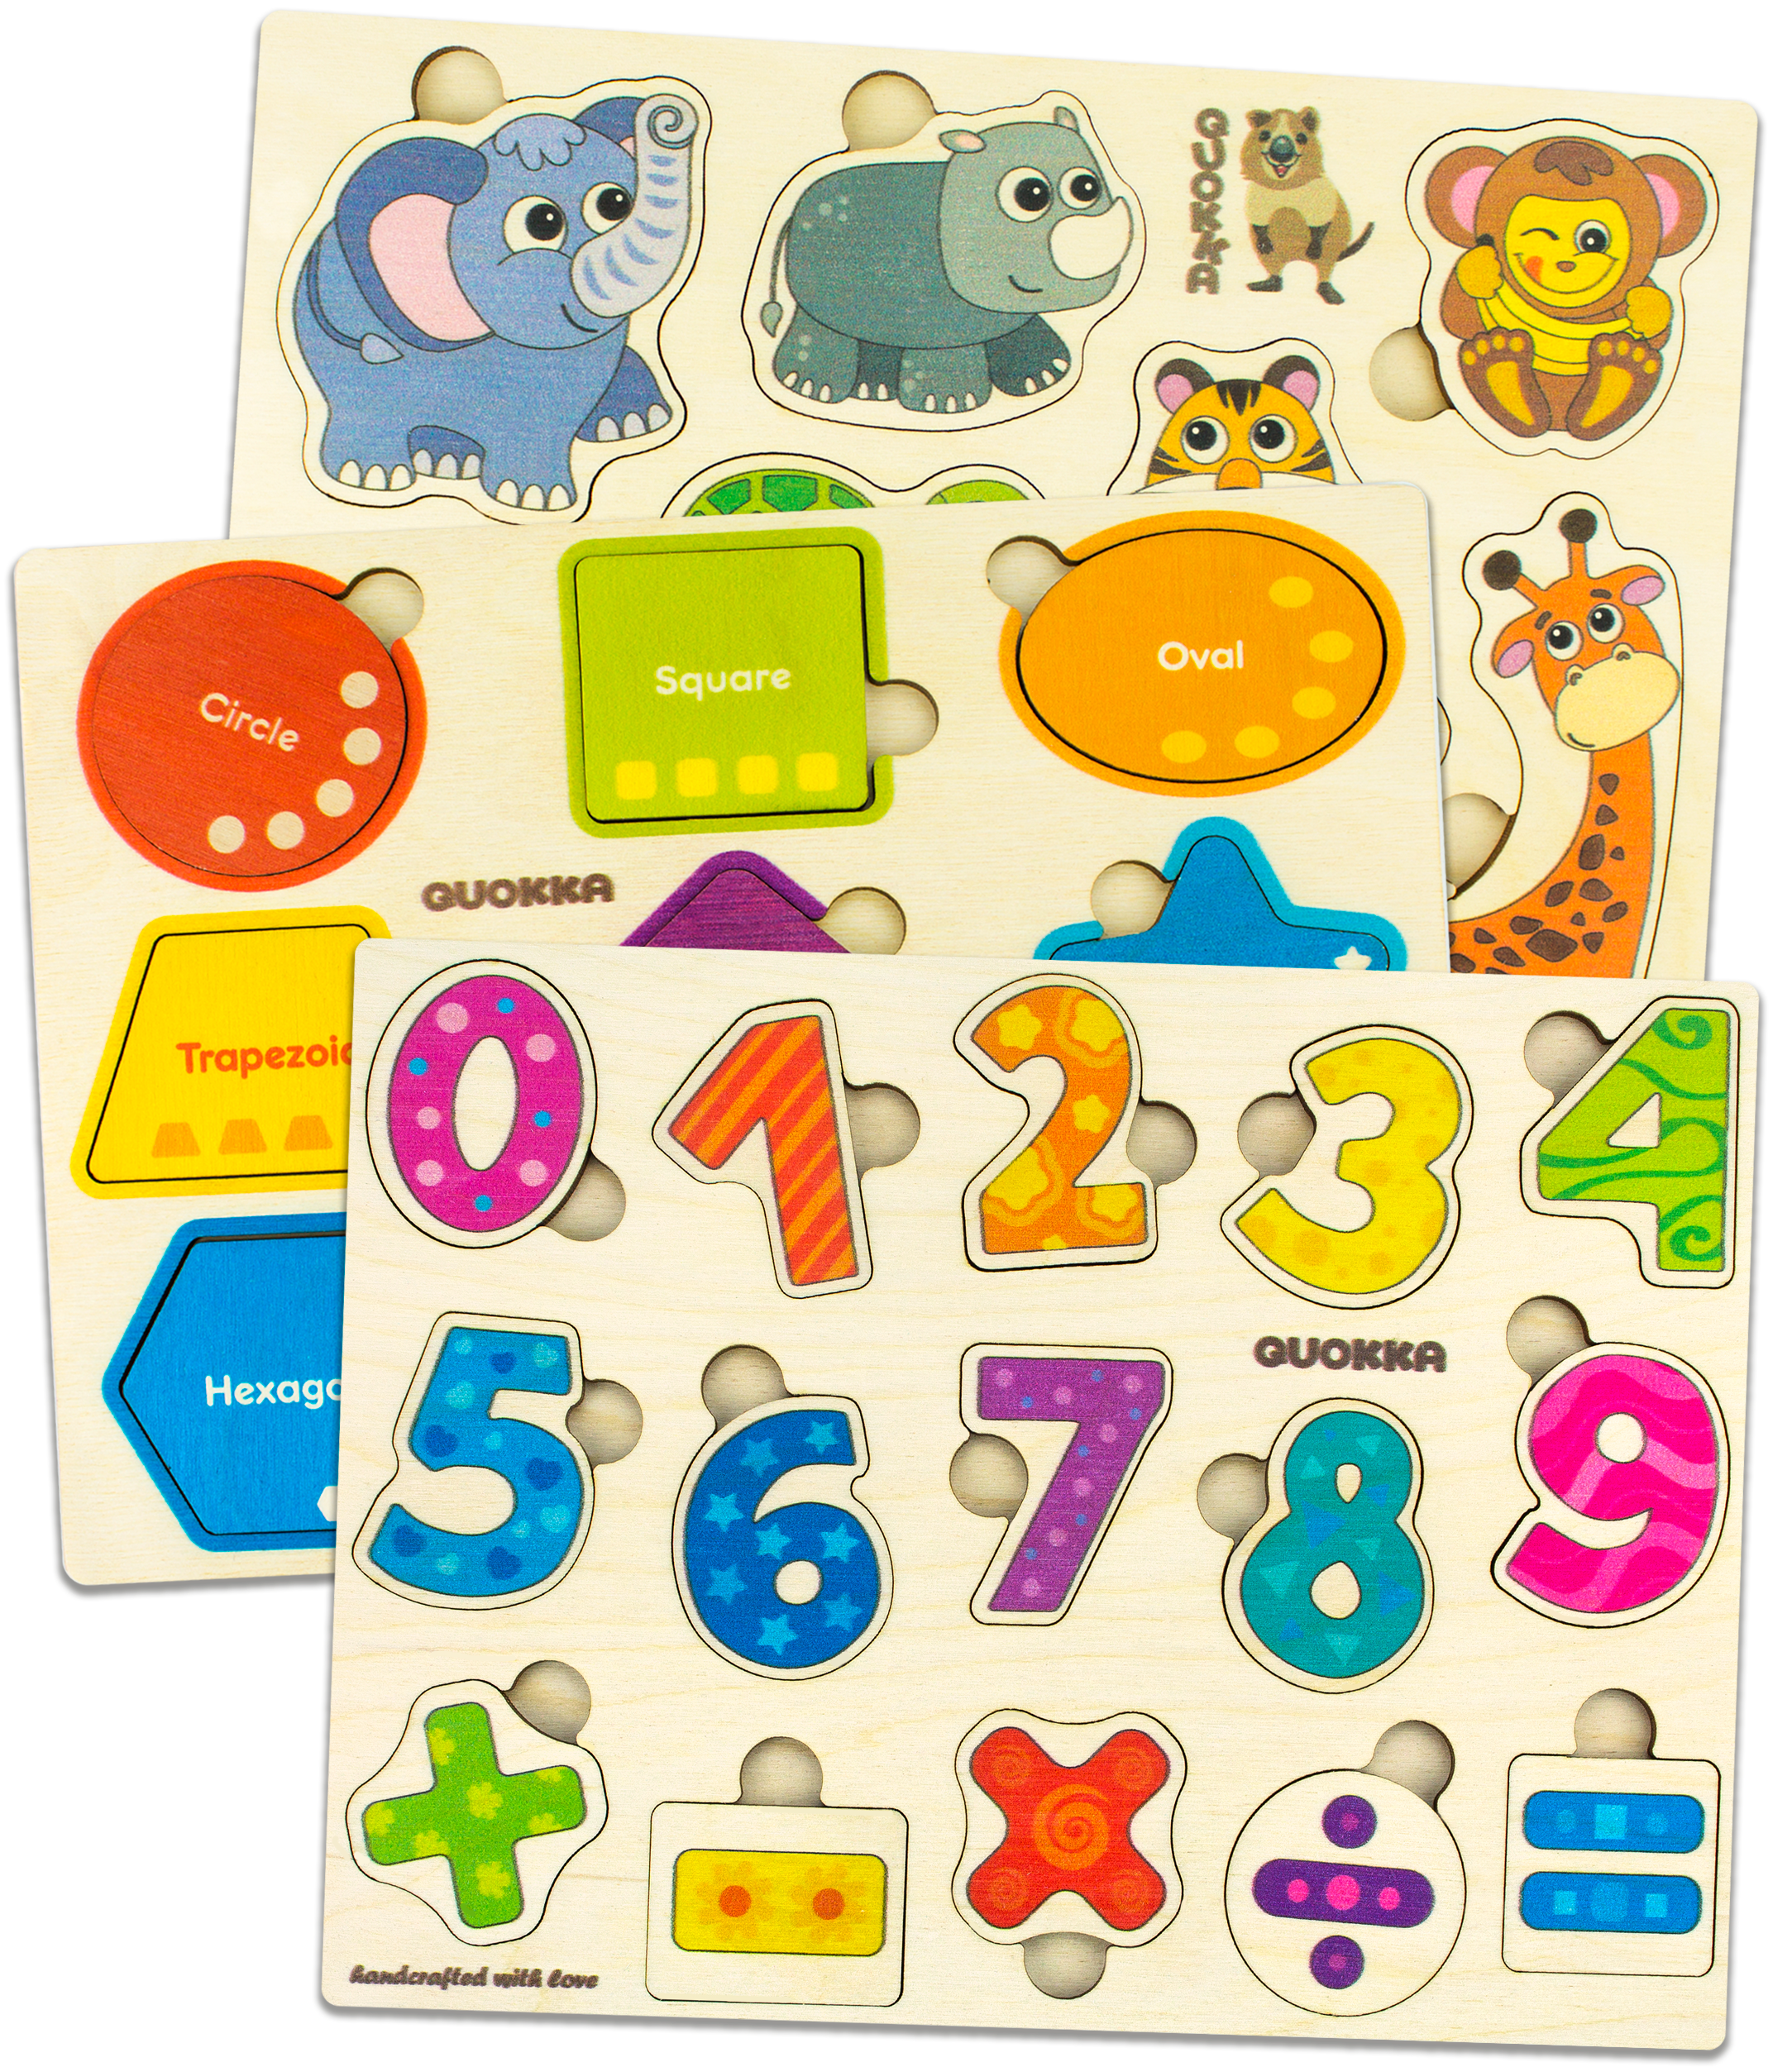 Quality Wooden Animals Play-Set Educational Pre-Kindergarten Toddler Puzzle Toy 